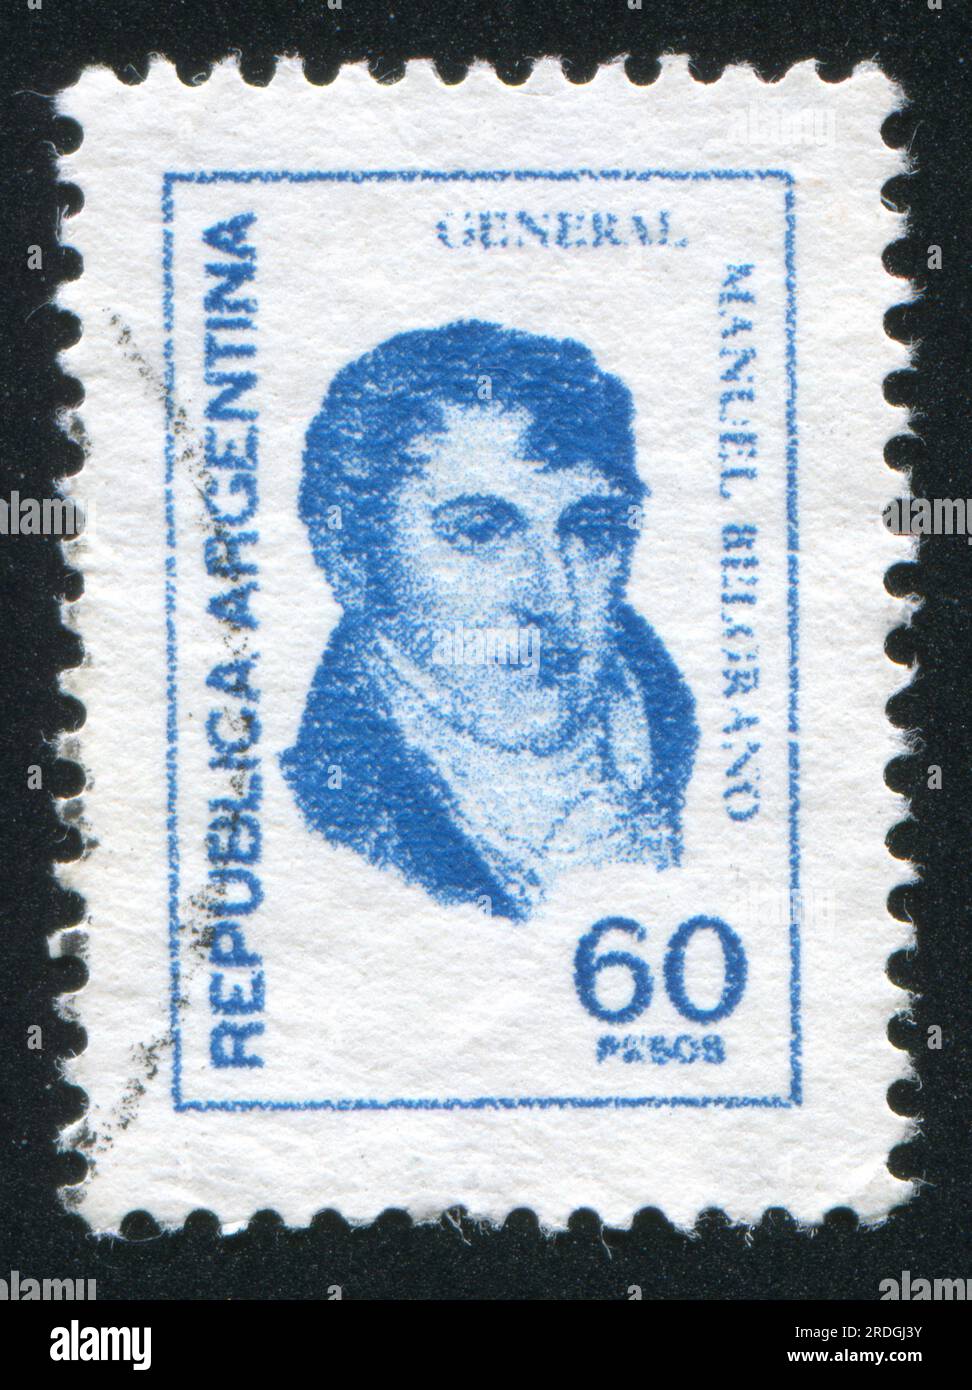 ARGENTINA - CIRCA 1970: stamp printed by Argentina, shows  Manuel Belgrano, economist, lawyer, politician, and military leader, circa 1970 Stock Photo